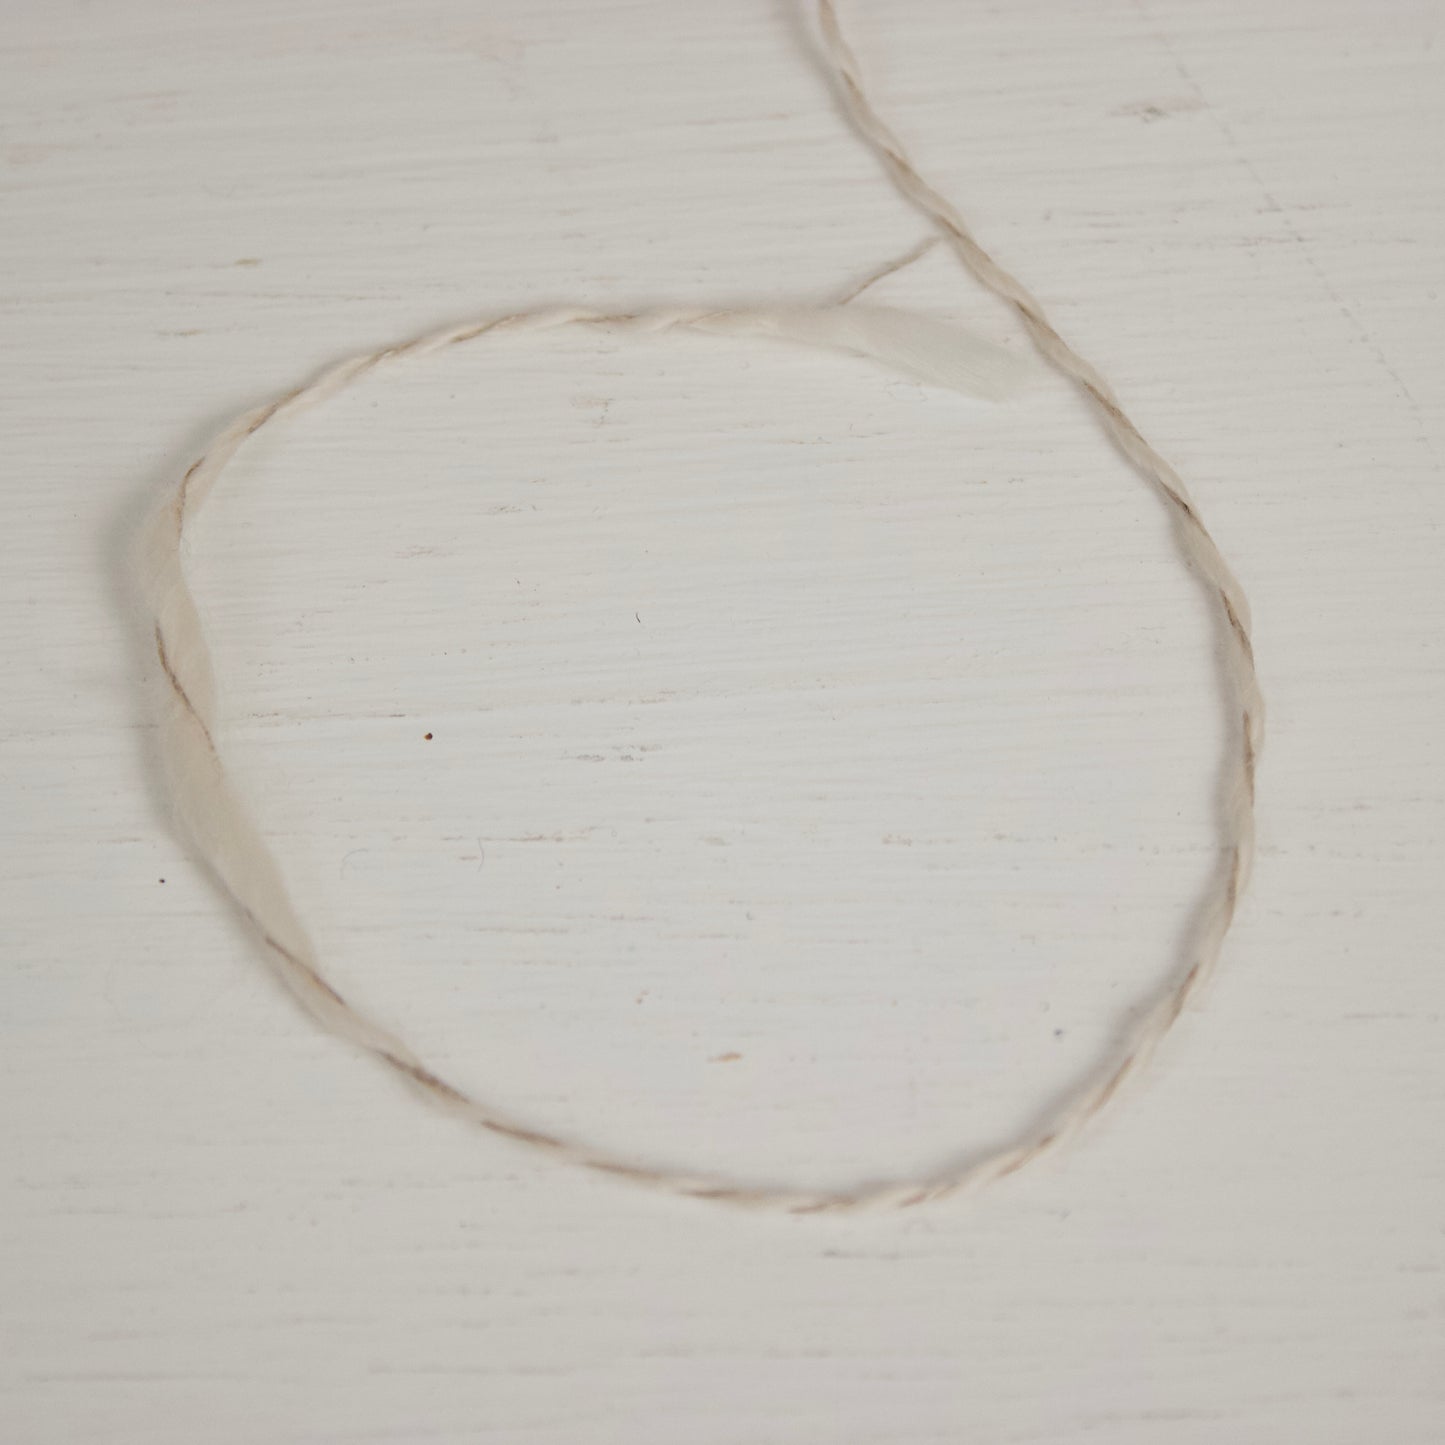 Linen & Cotton Slub - Undyed Yarn for Dyers - Special Order Only